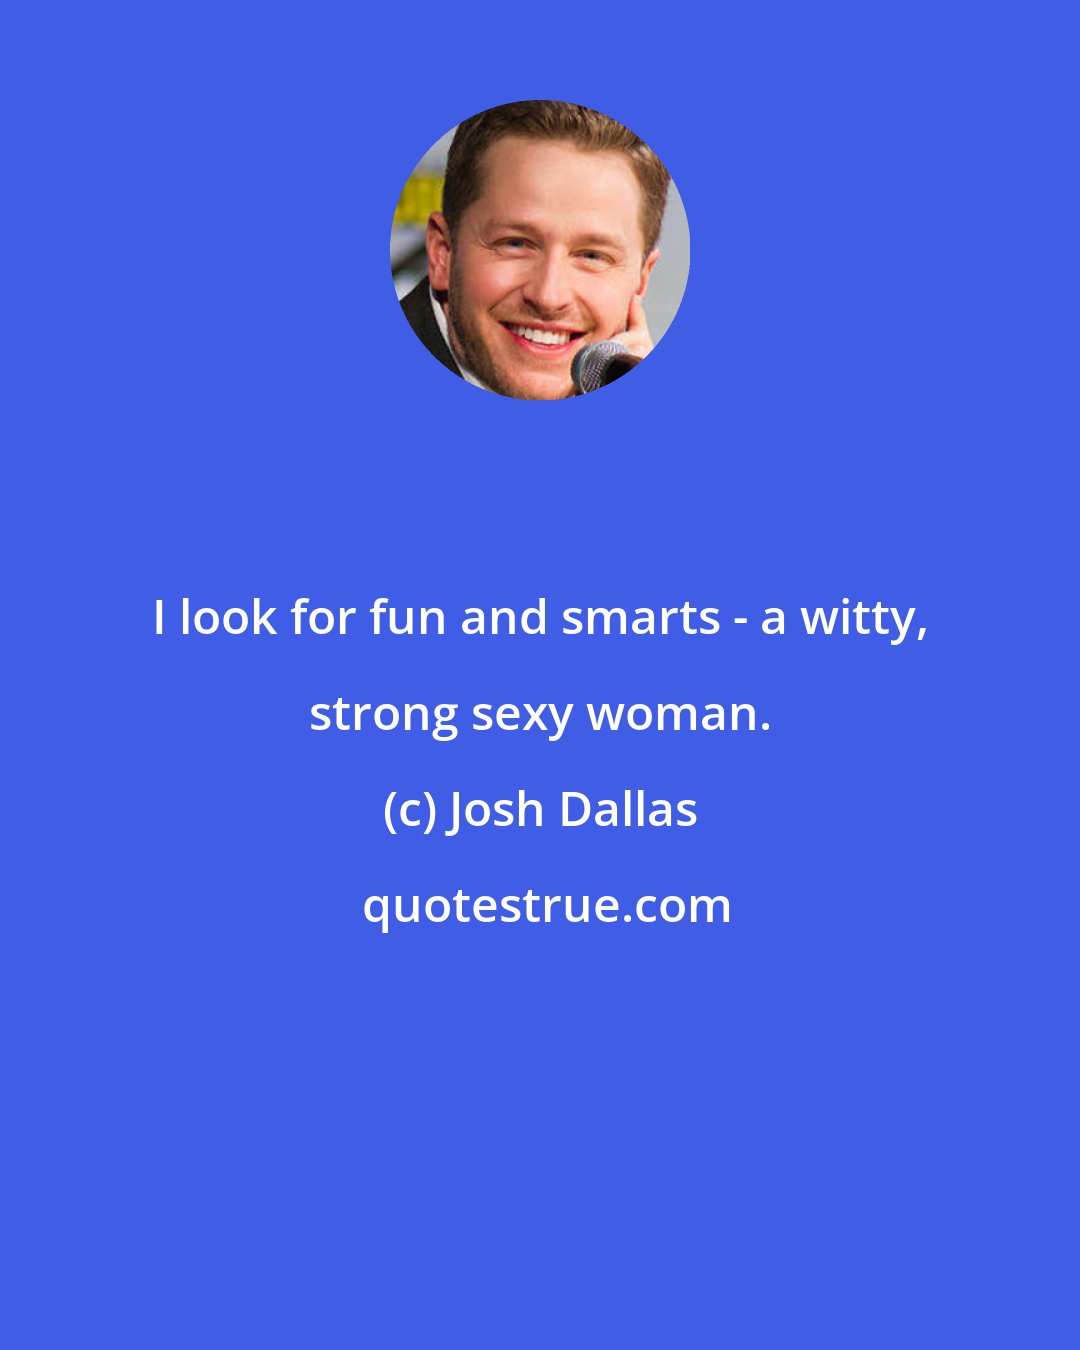 Josh Dallas: I look for fun and smarts - a witty, strong sexy woman.